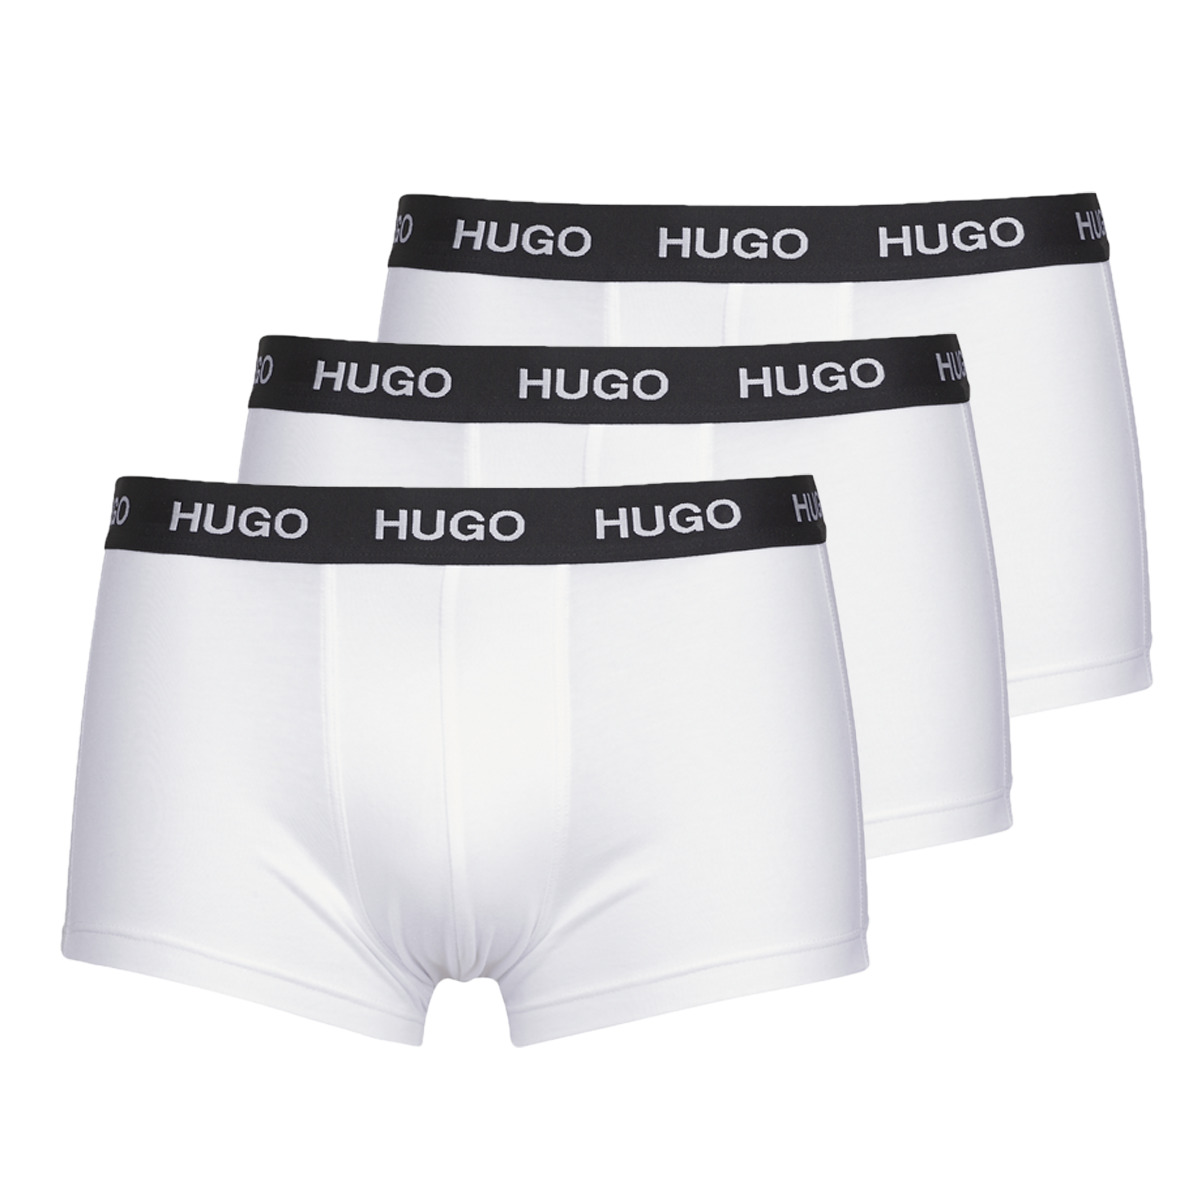 HUGO TRUNK TRIPLET PACK White Fast Underwear Boxer delivery ! - 36,80 € | Spartoo - shorts Men Europe